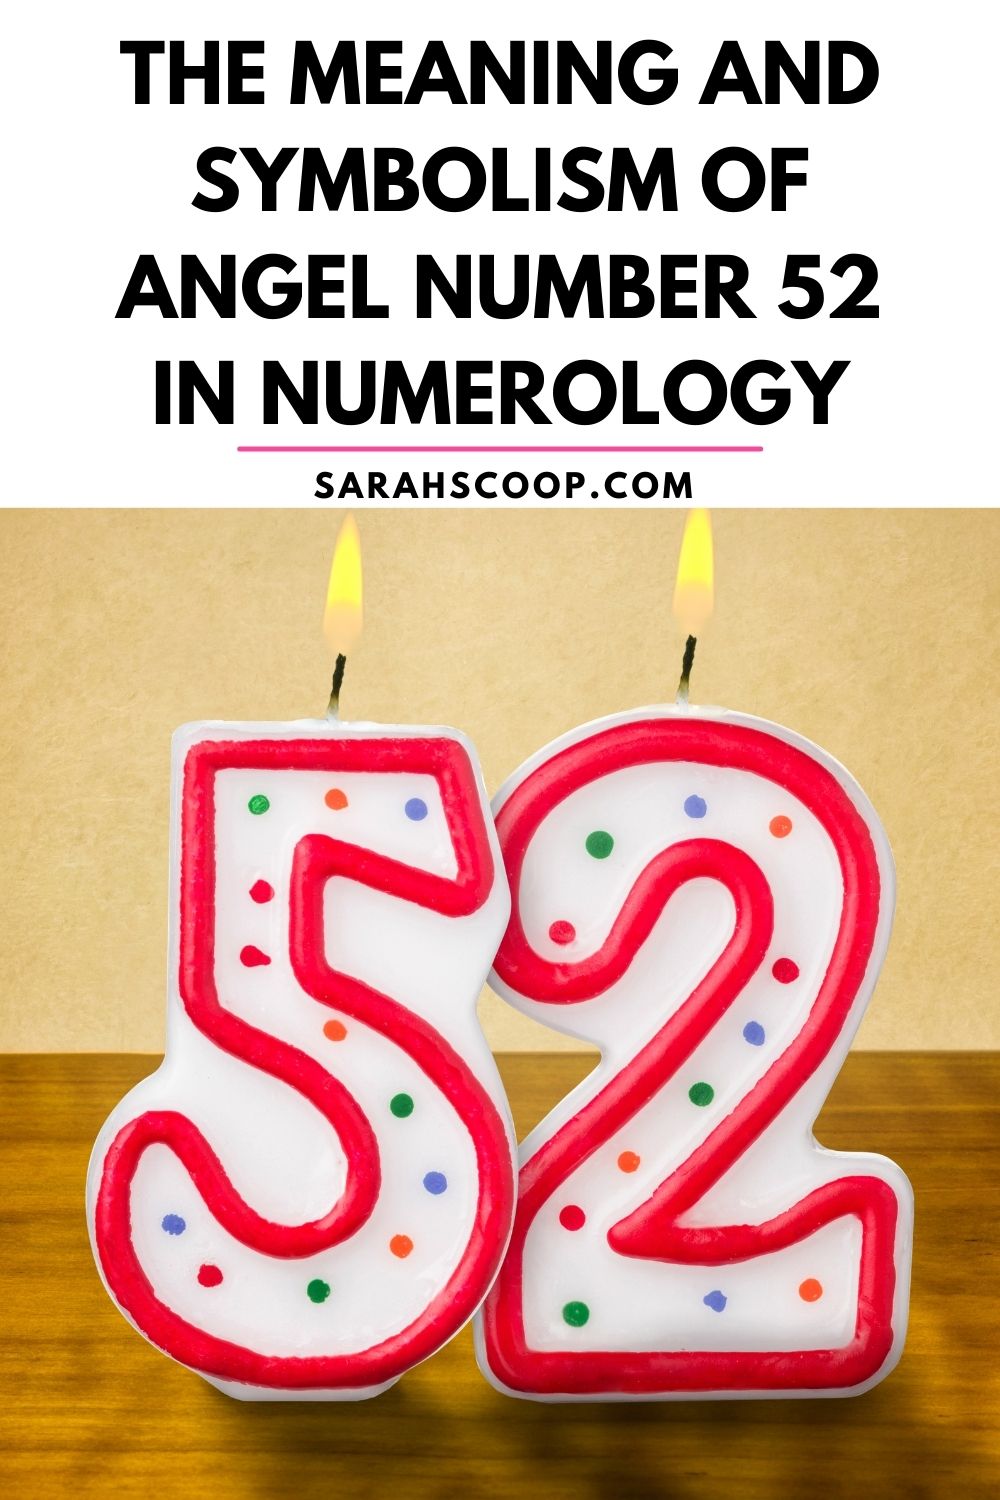 The Meaning and Symbolism of Angel Number 52 in Numerology Sarah Scoop